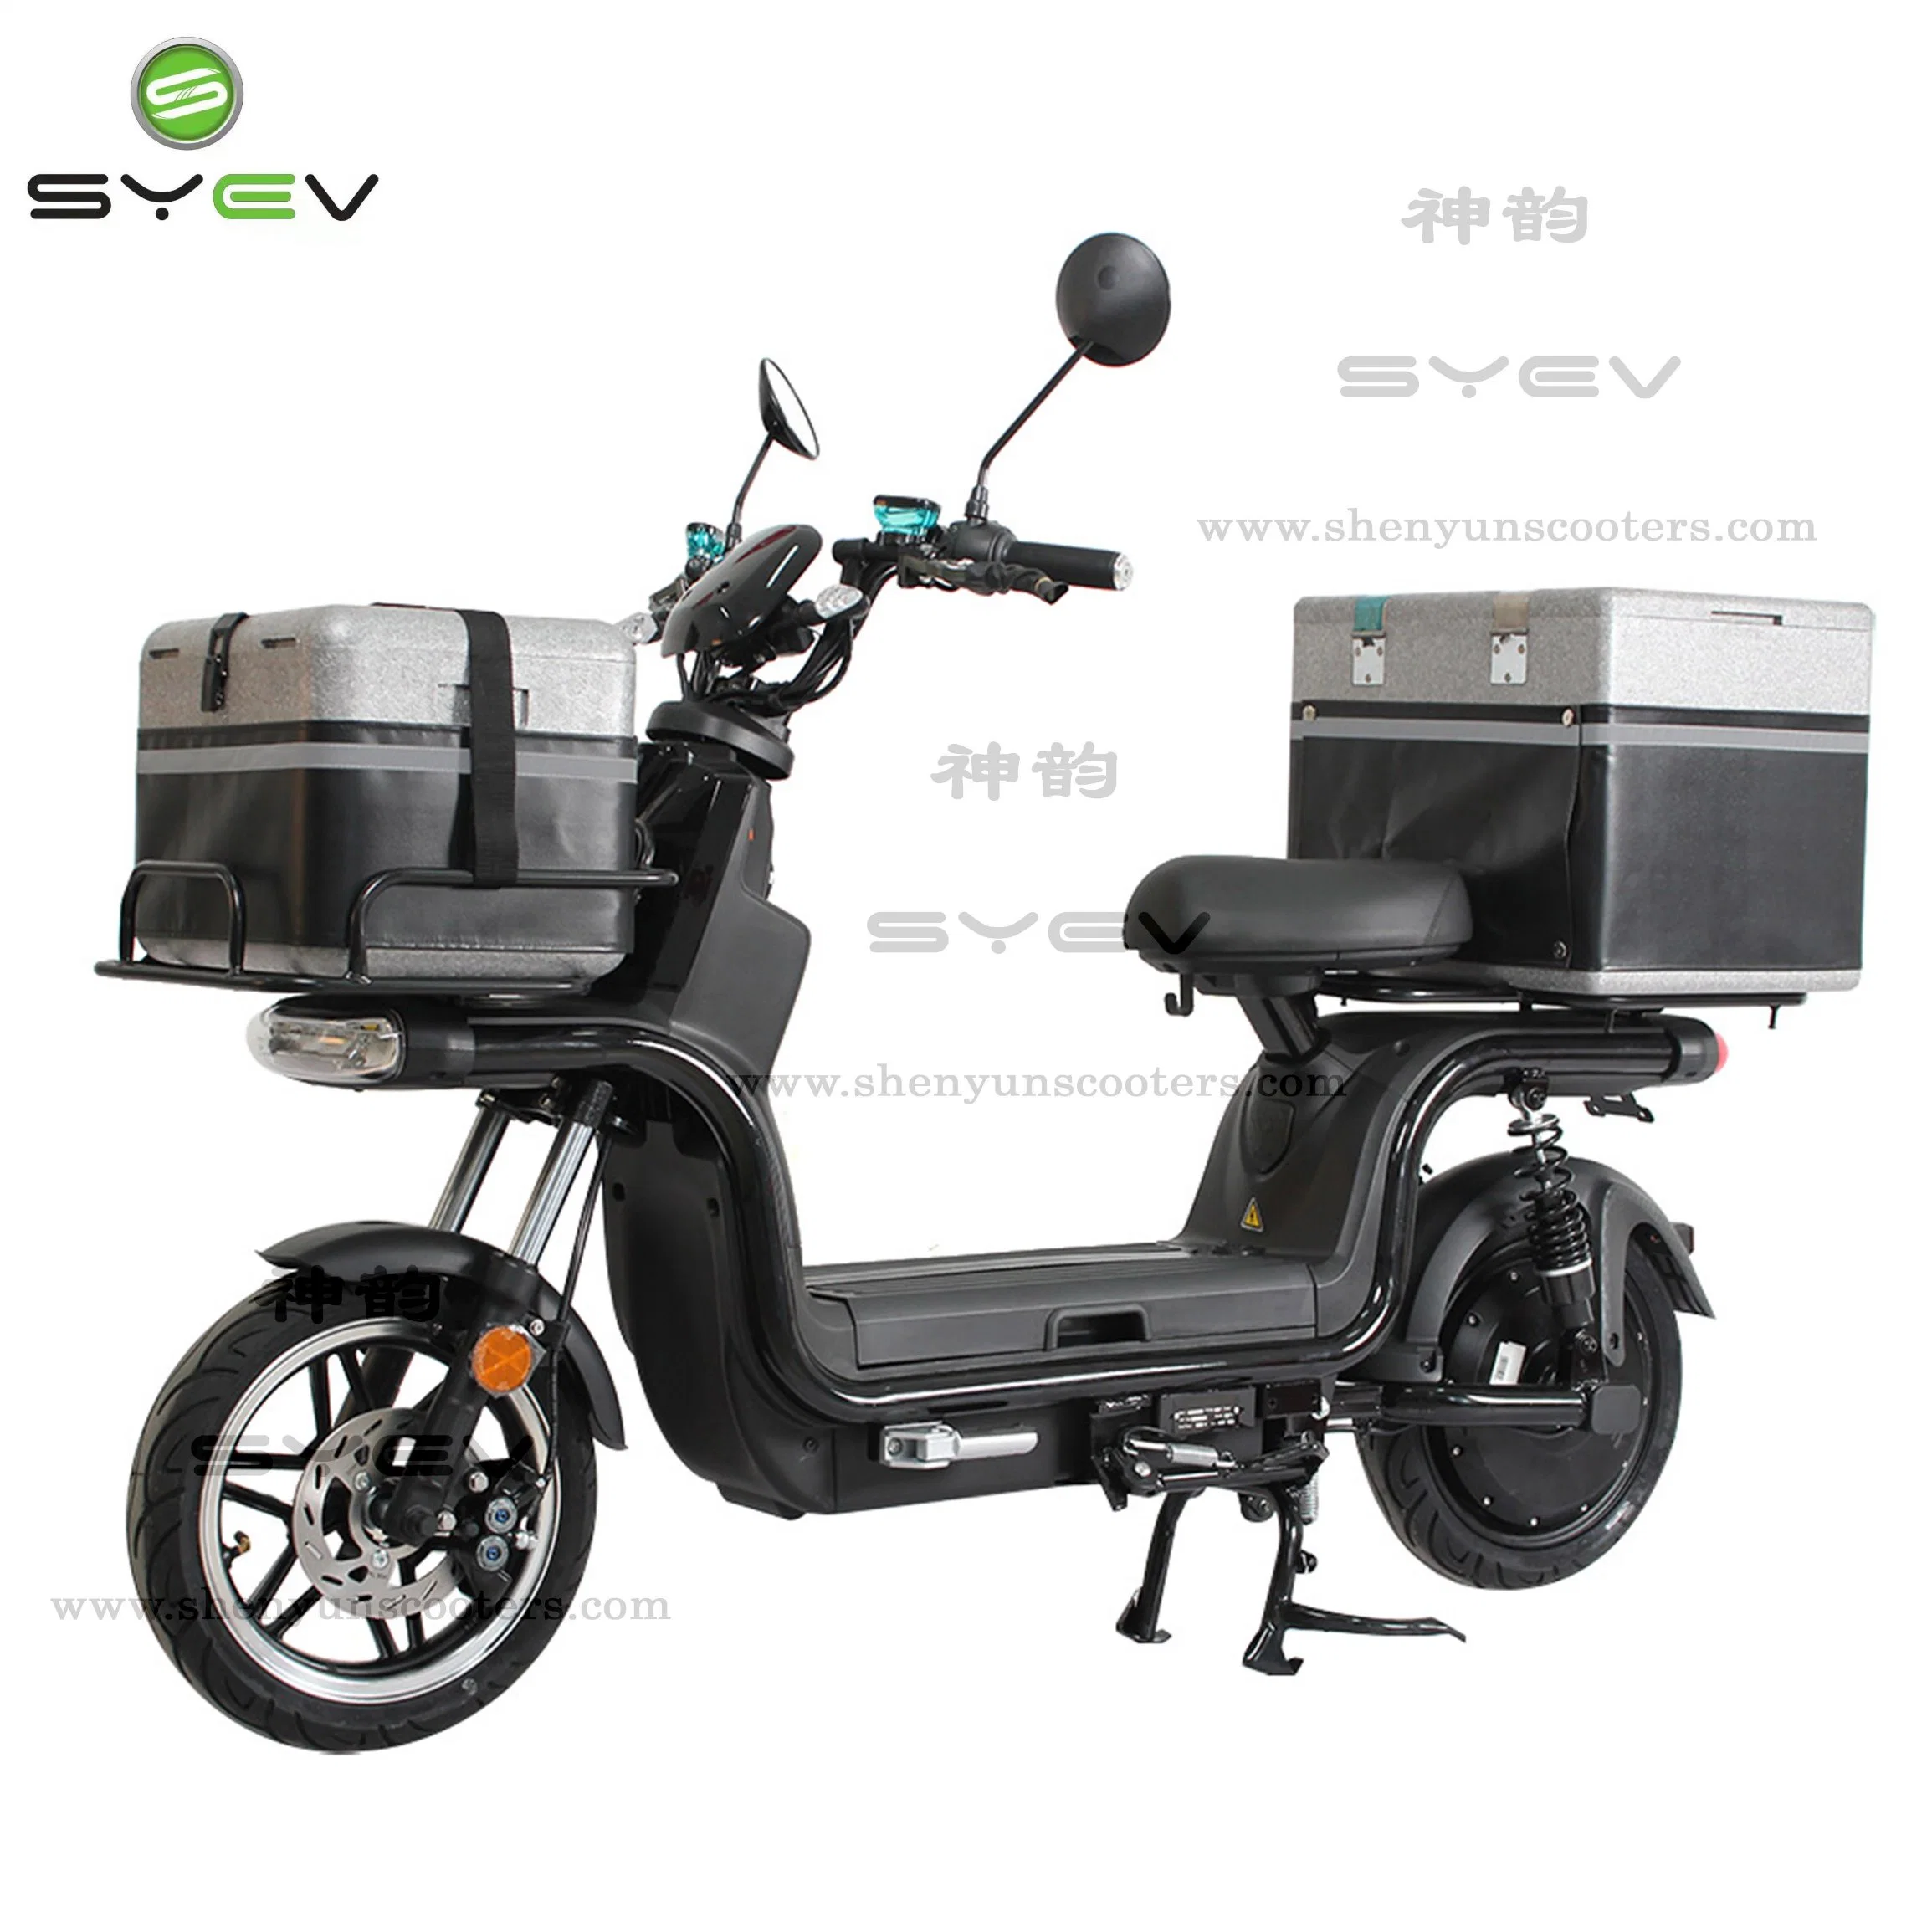 with EEC Certificate, 1200W Motor Delivery Motorcycle/Bike with Delivery Box 6026ah Lithium Battery